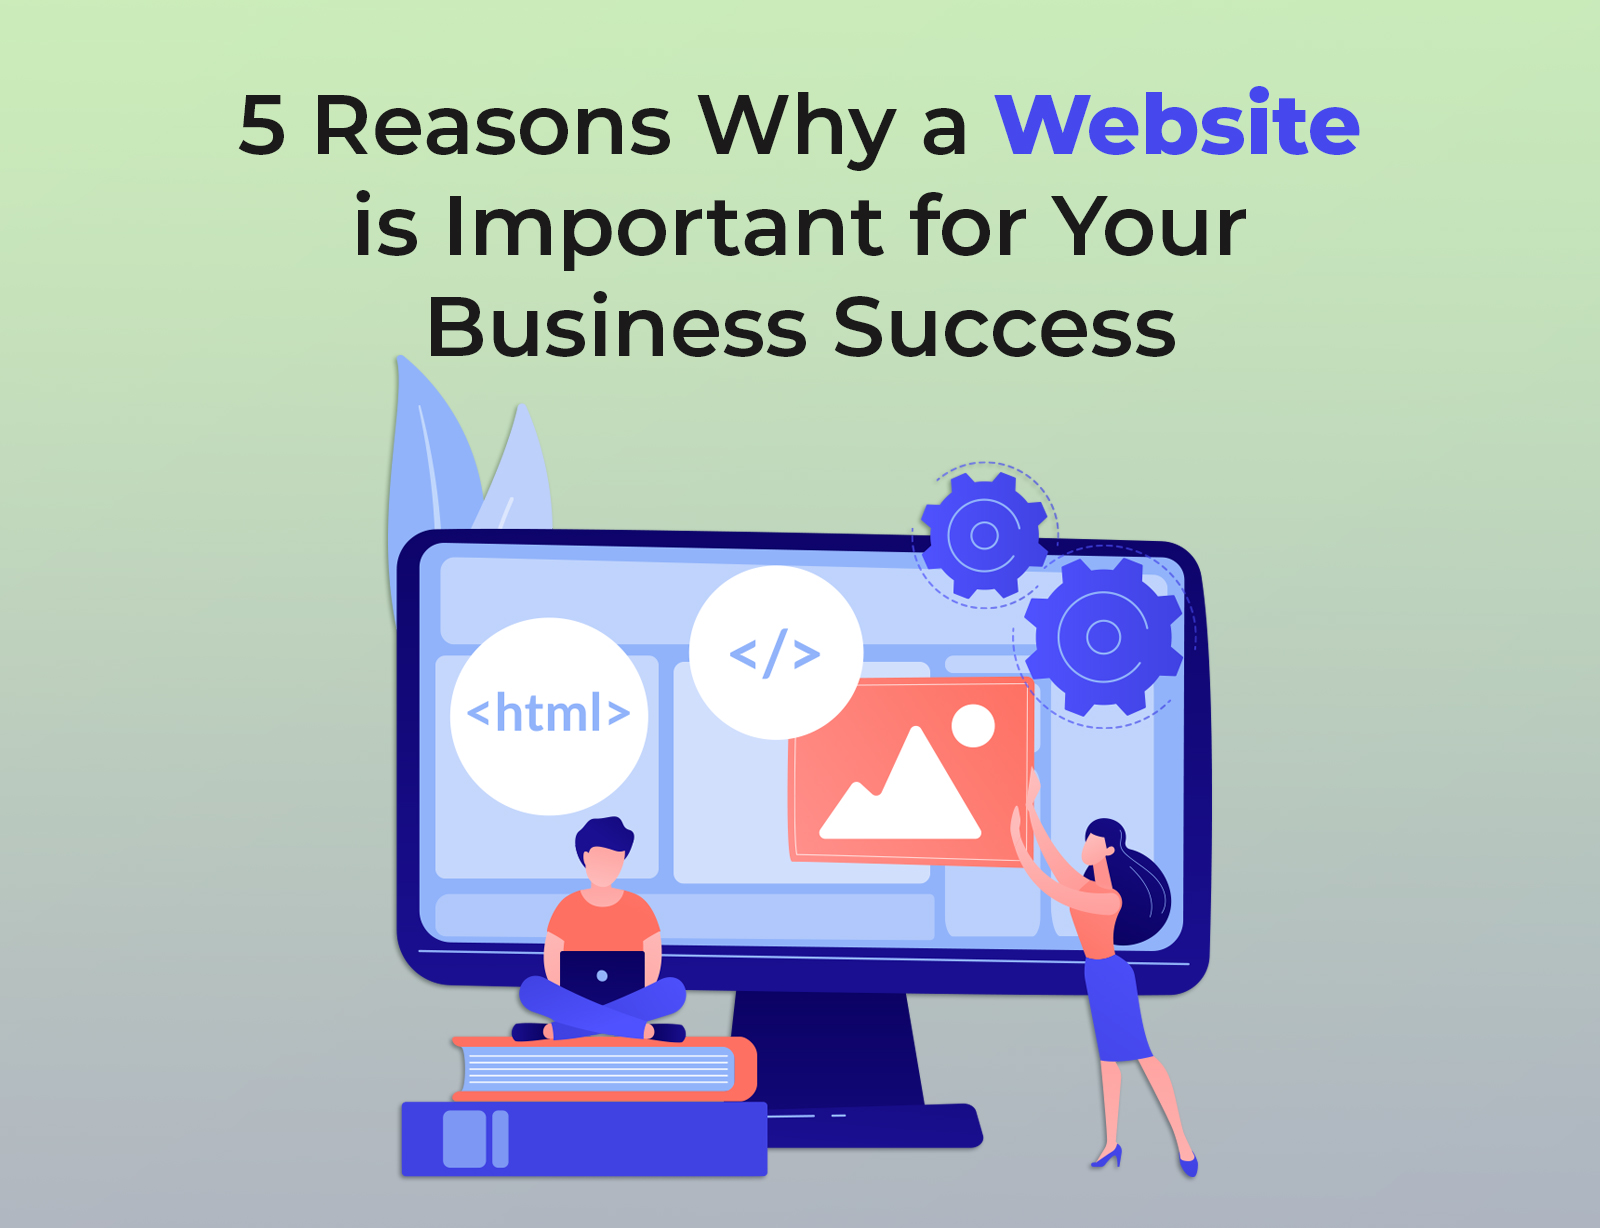 5 Reasons why a website is important for your business success